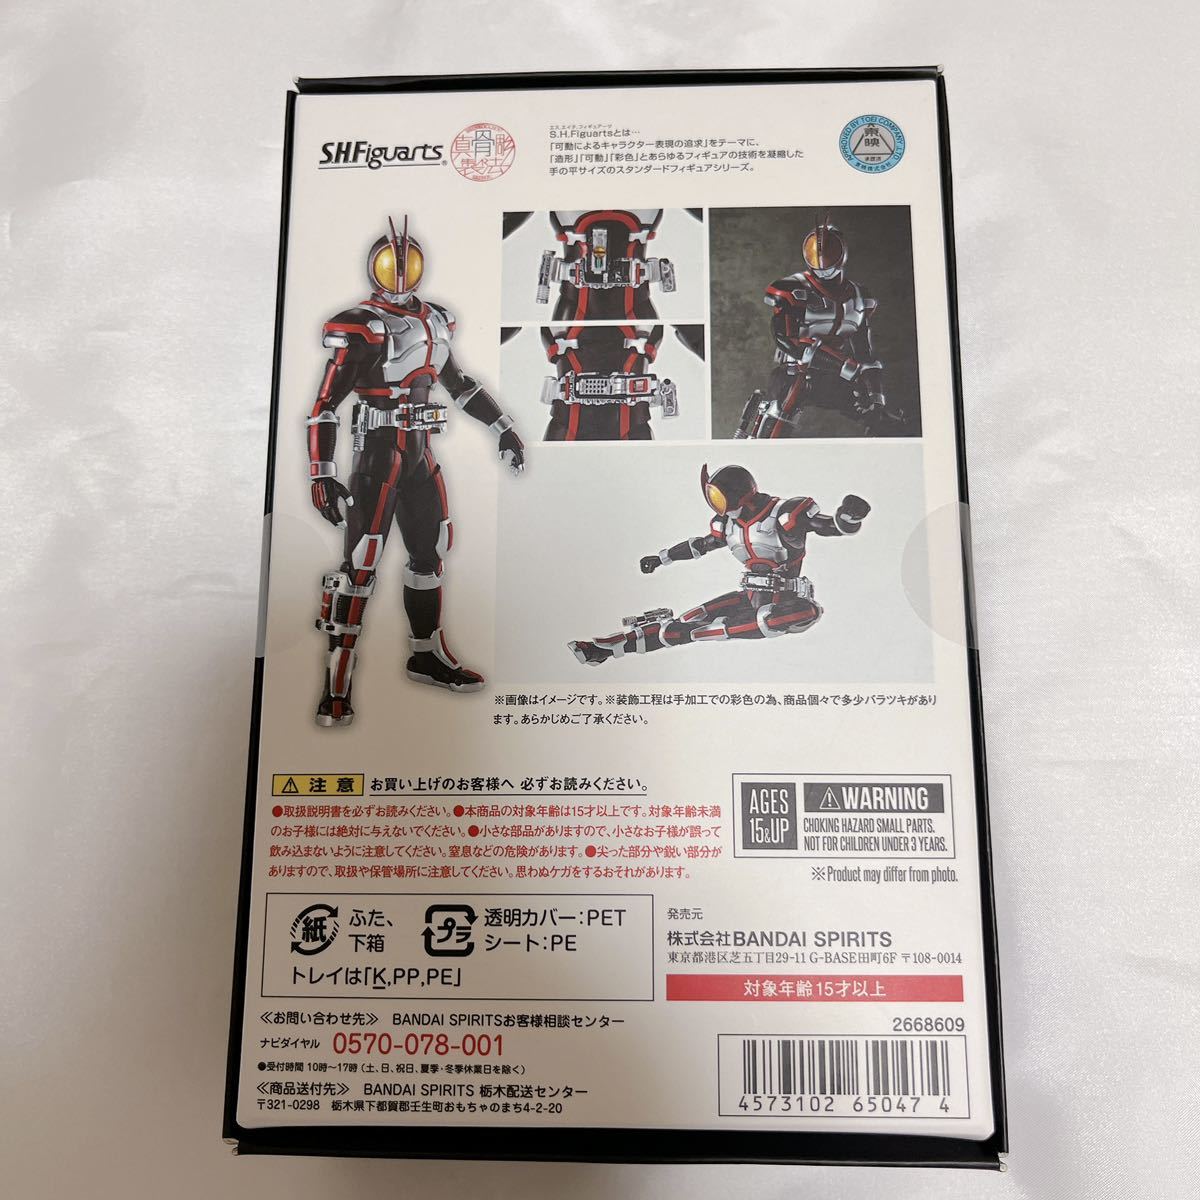 S H Figuarts 真骨彫 仮面ライダーファイズ 555 新品未開封 真骨彫製法